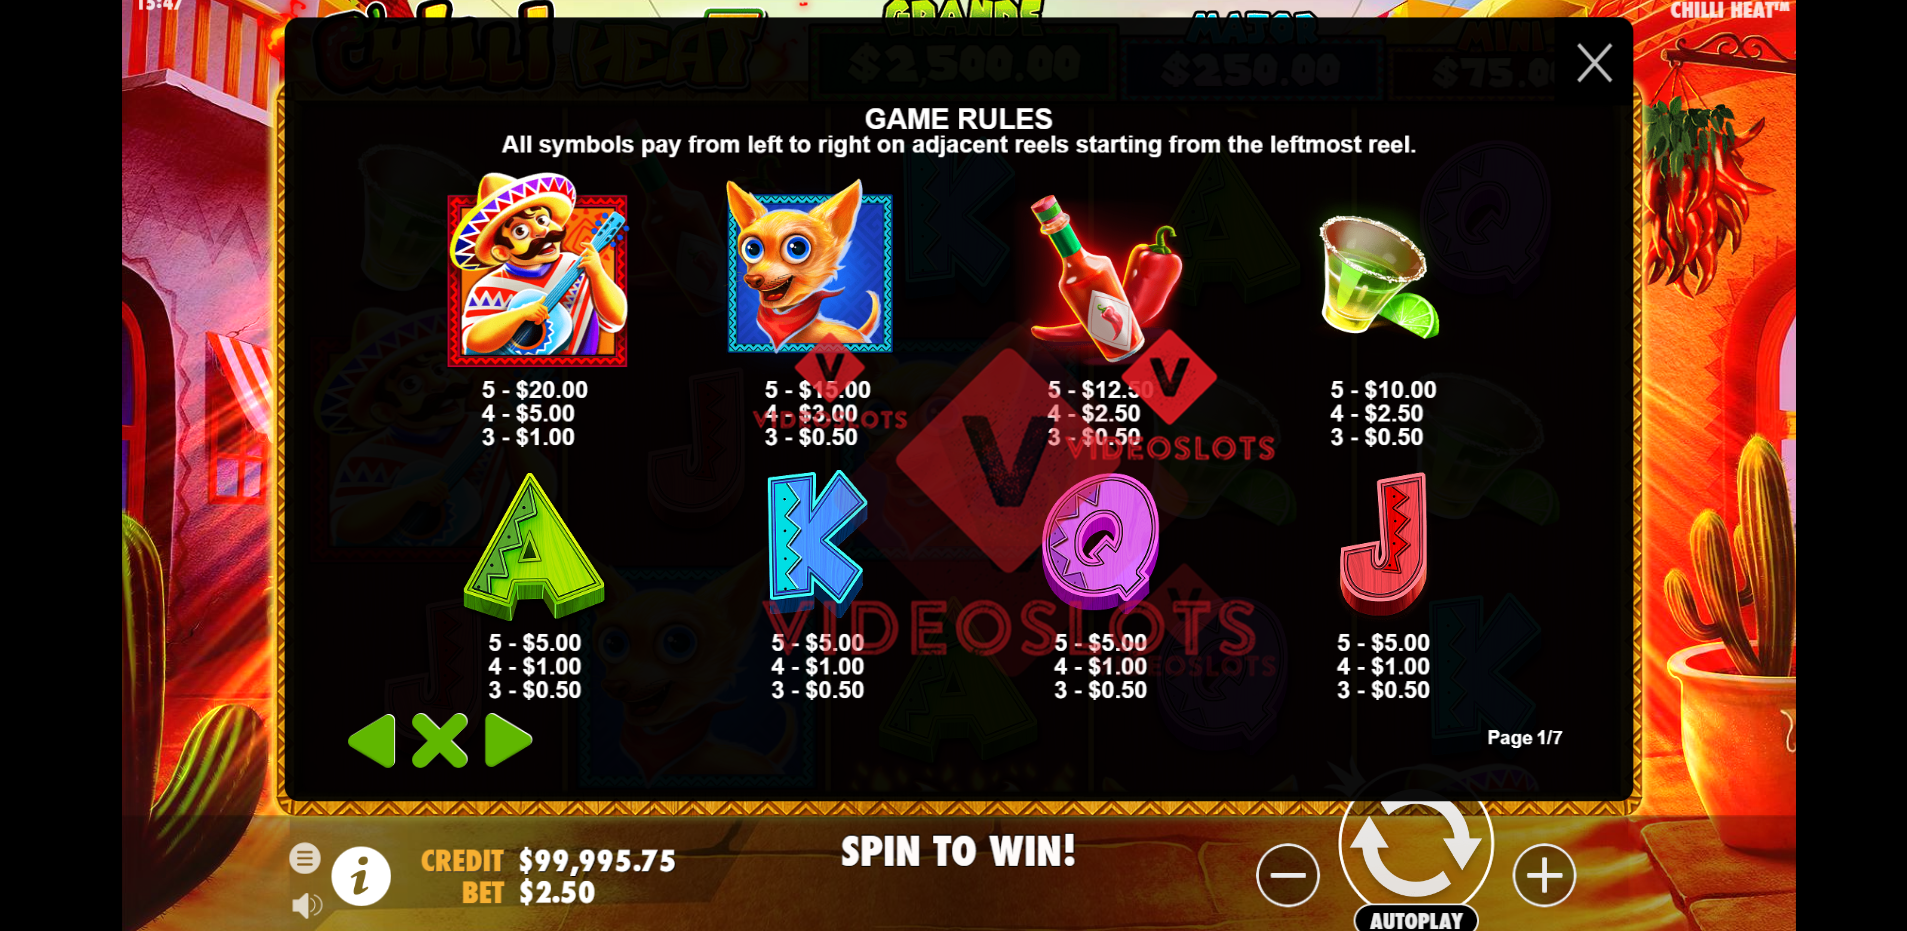 Pay Table for Chilli Heat slot by Pragmatic Play